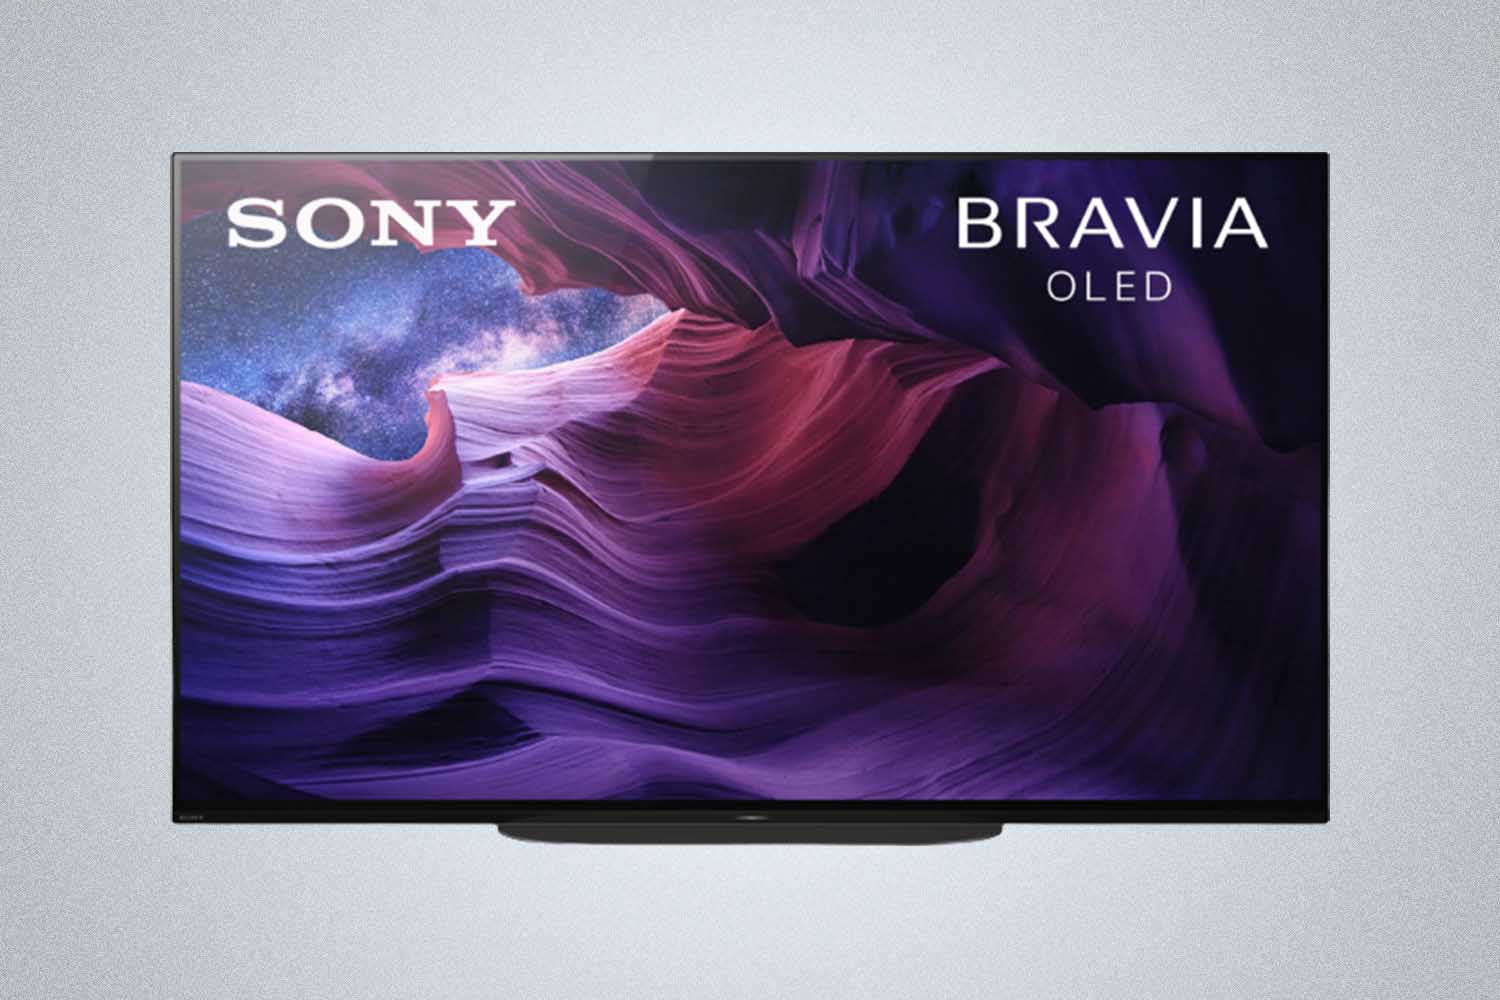 Sony - 48" Class BRAVIA A9S Series OLED, now on sale at Best Buy